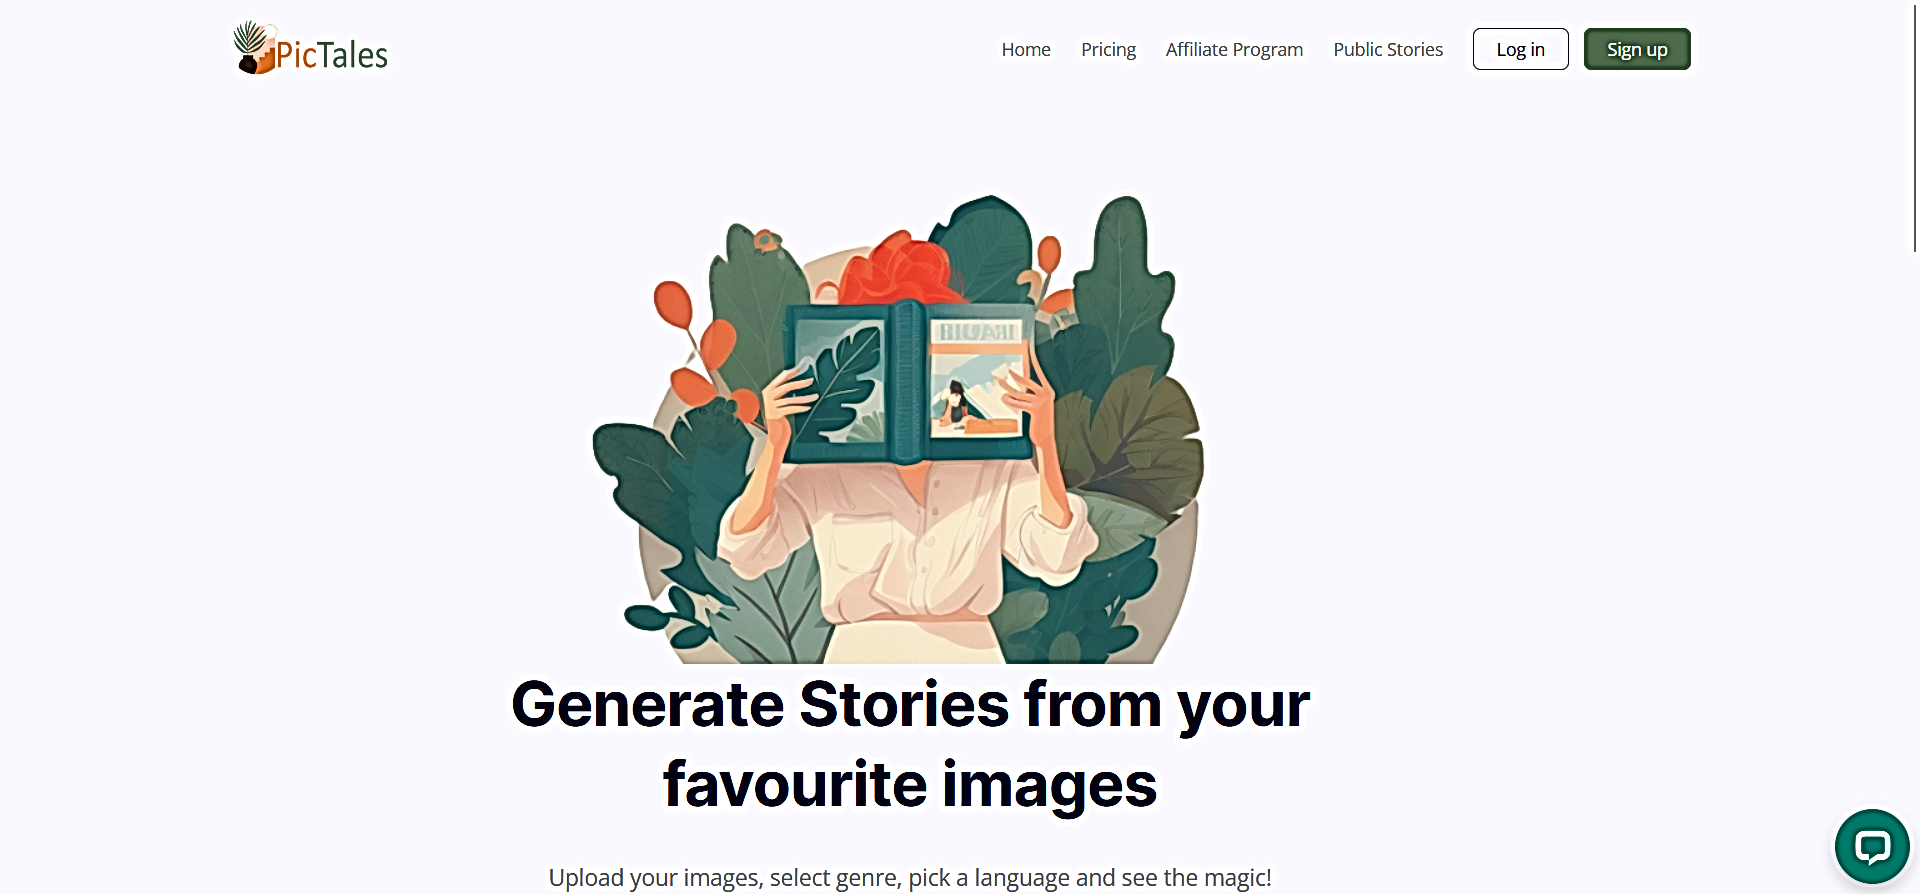 PicTales featured